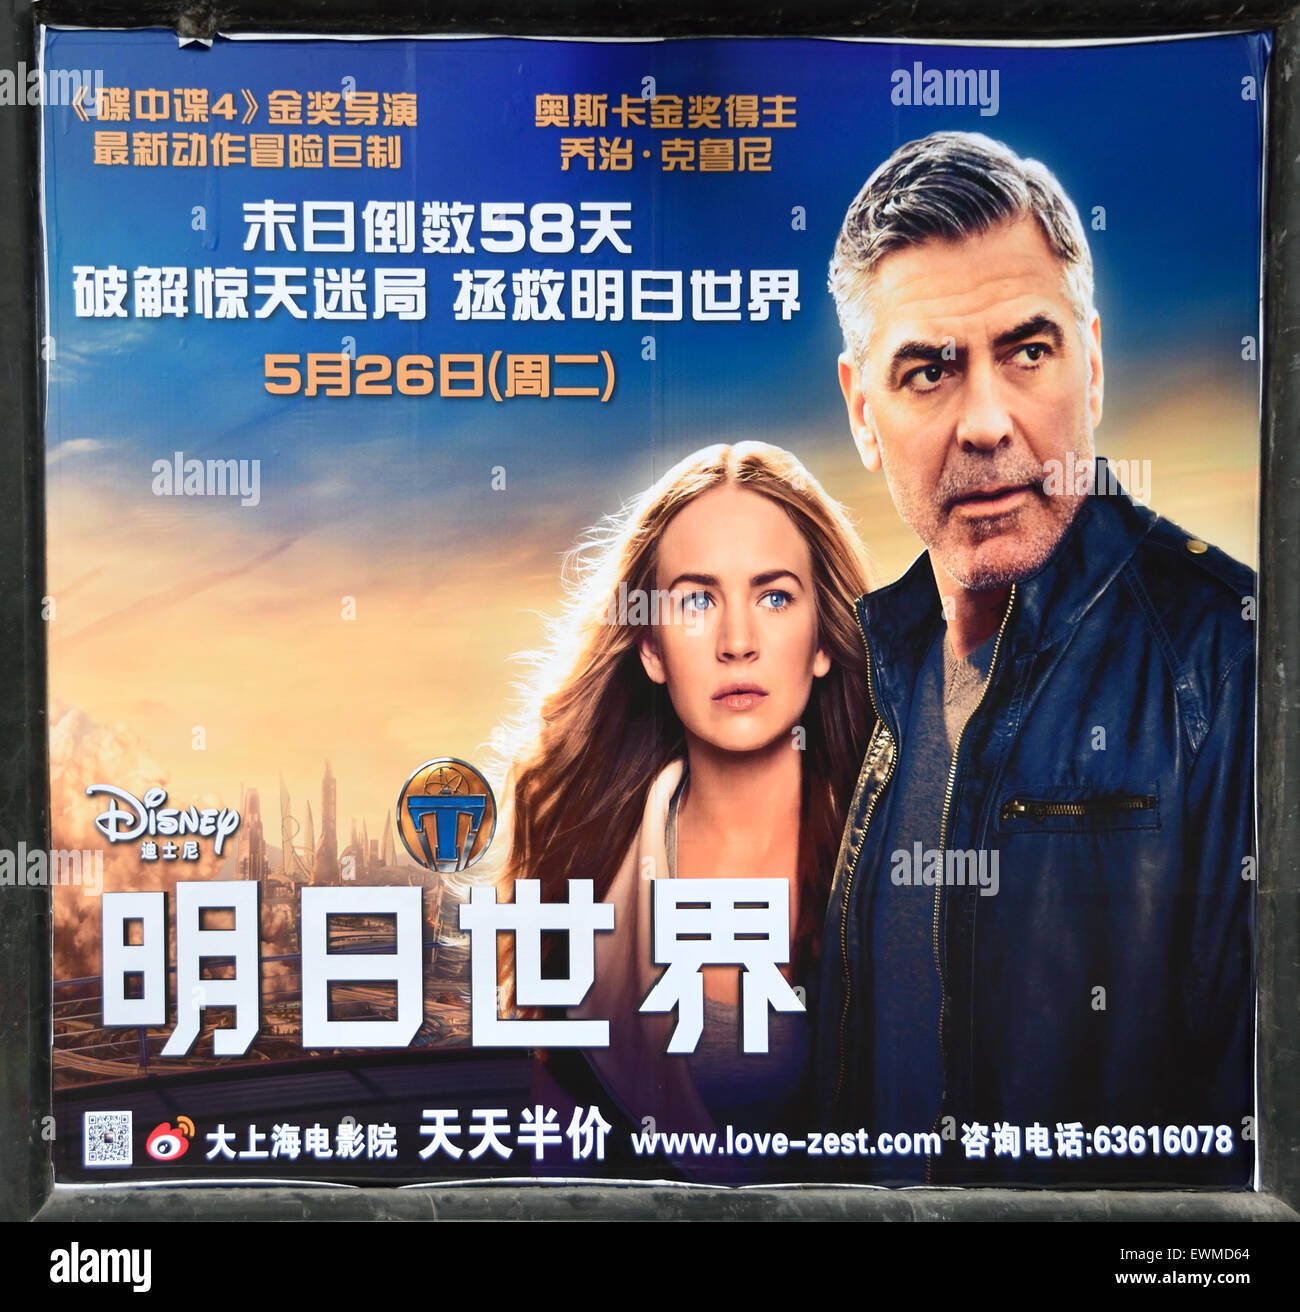 George Clooney Film billboard Star People's Square Nanjing Road Shanghai China Chinese Banque D'Images